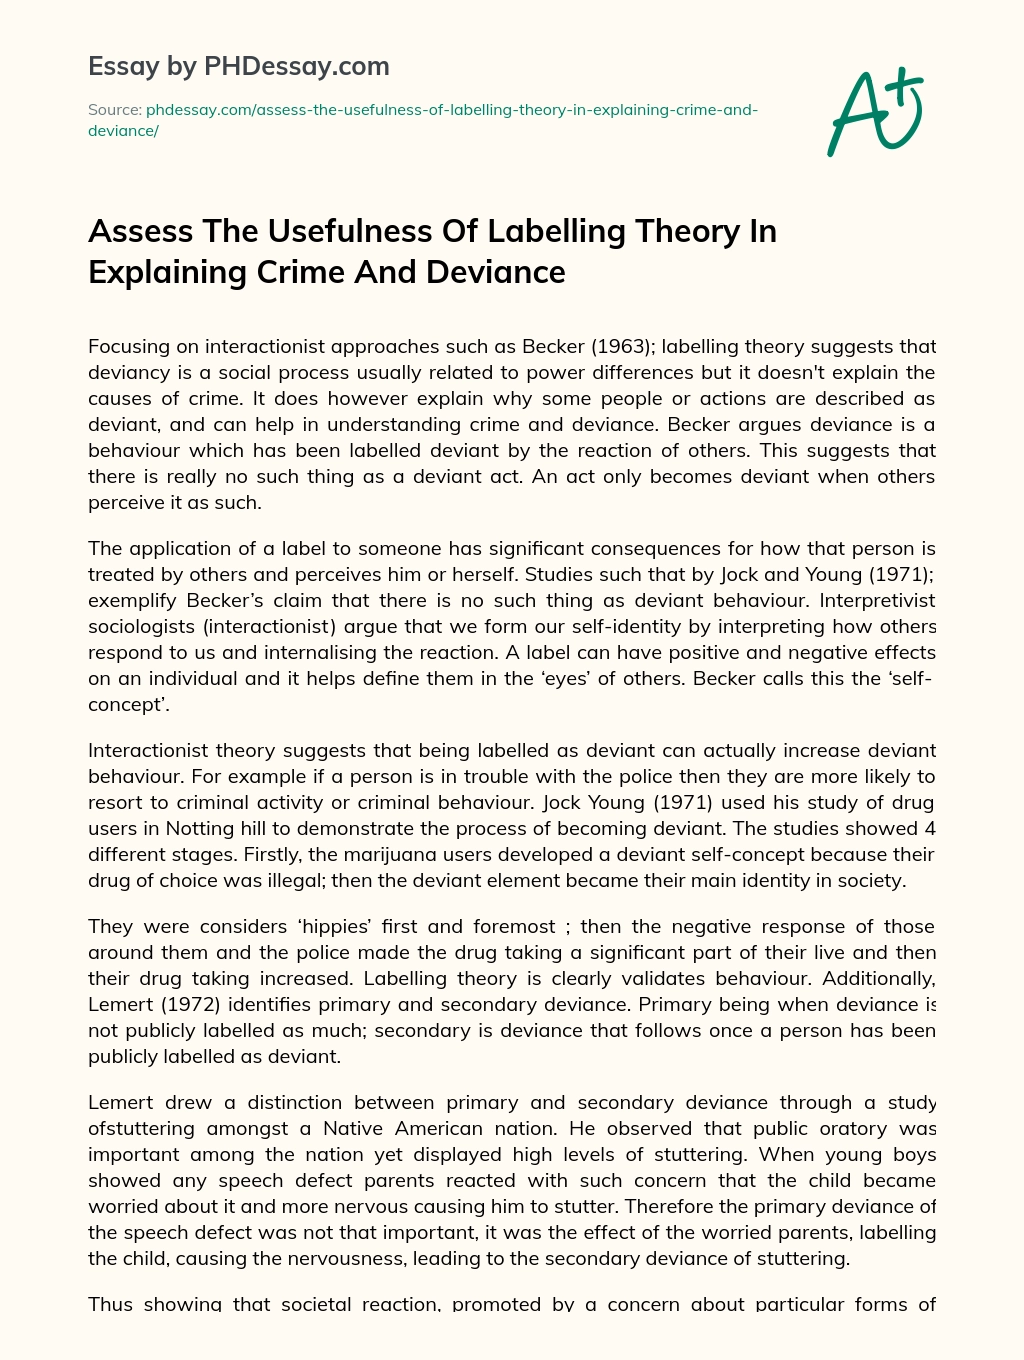 Assess The Usefulness Of Labelling Theory In Explaining Crime And Deviance essay